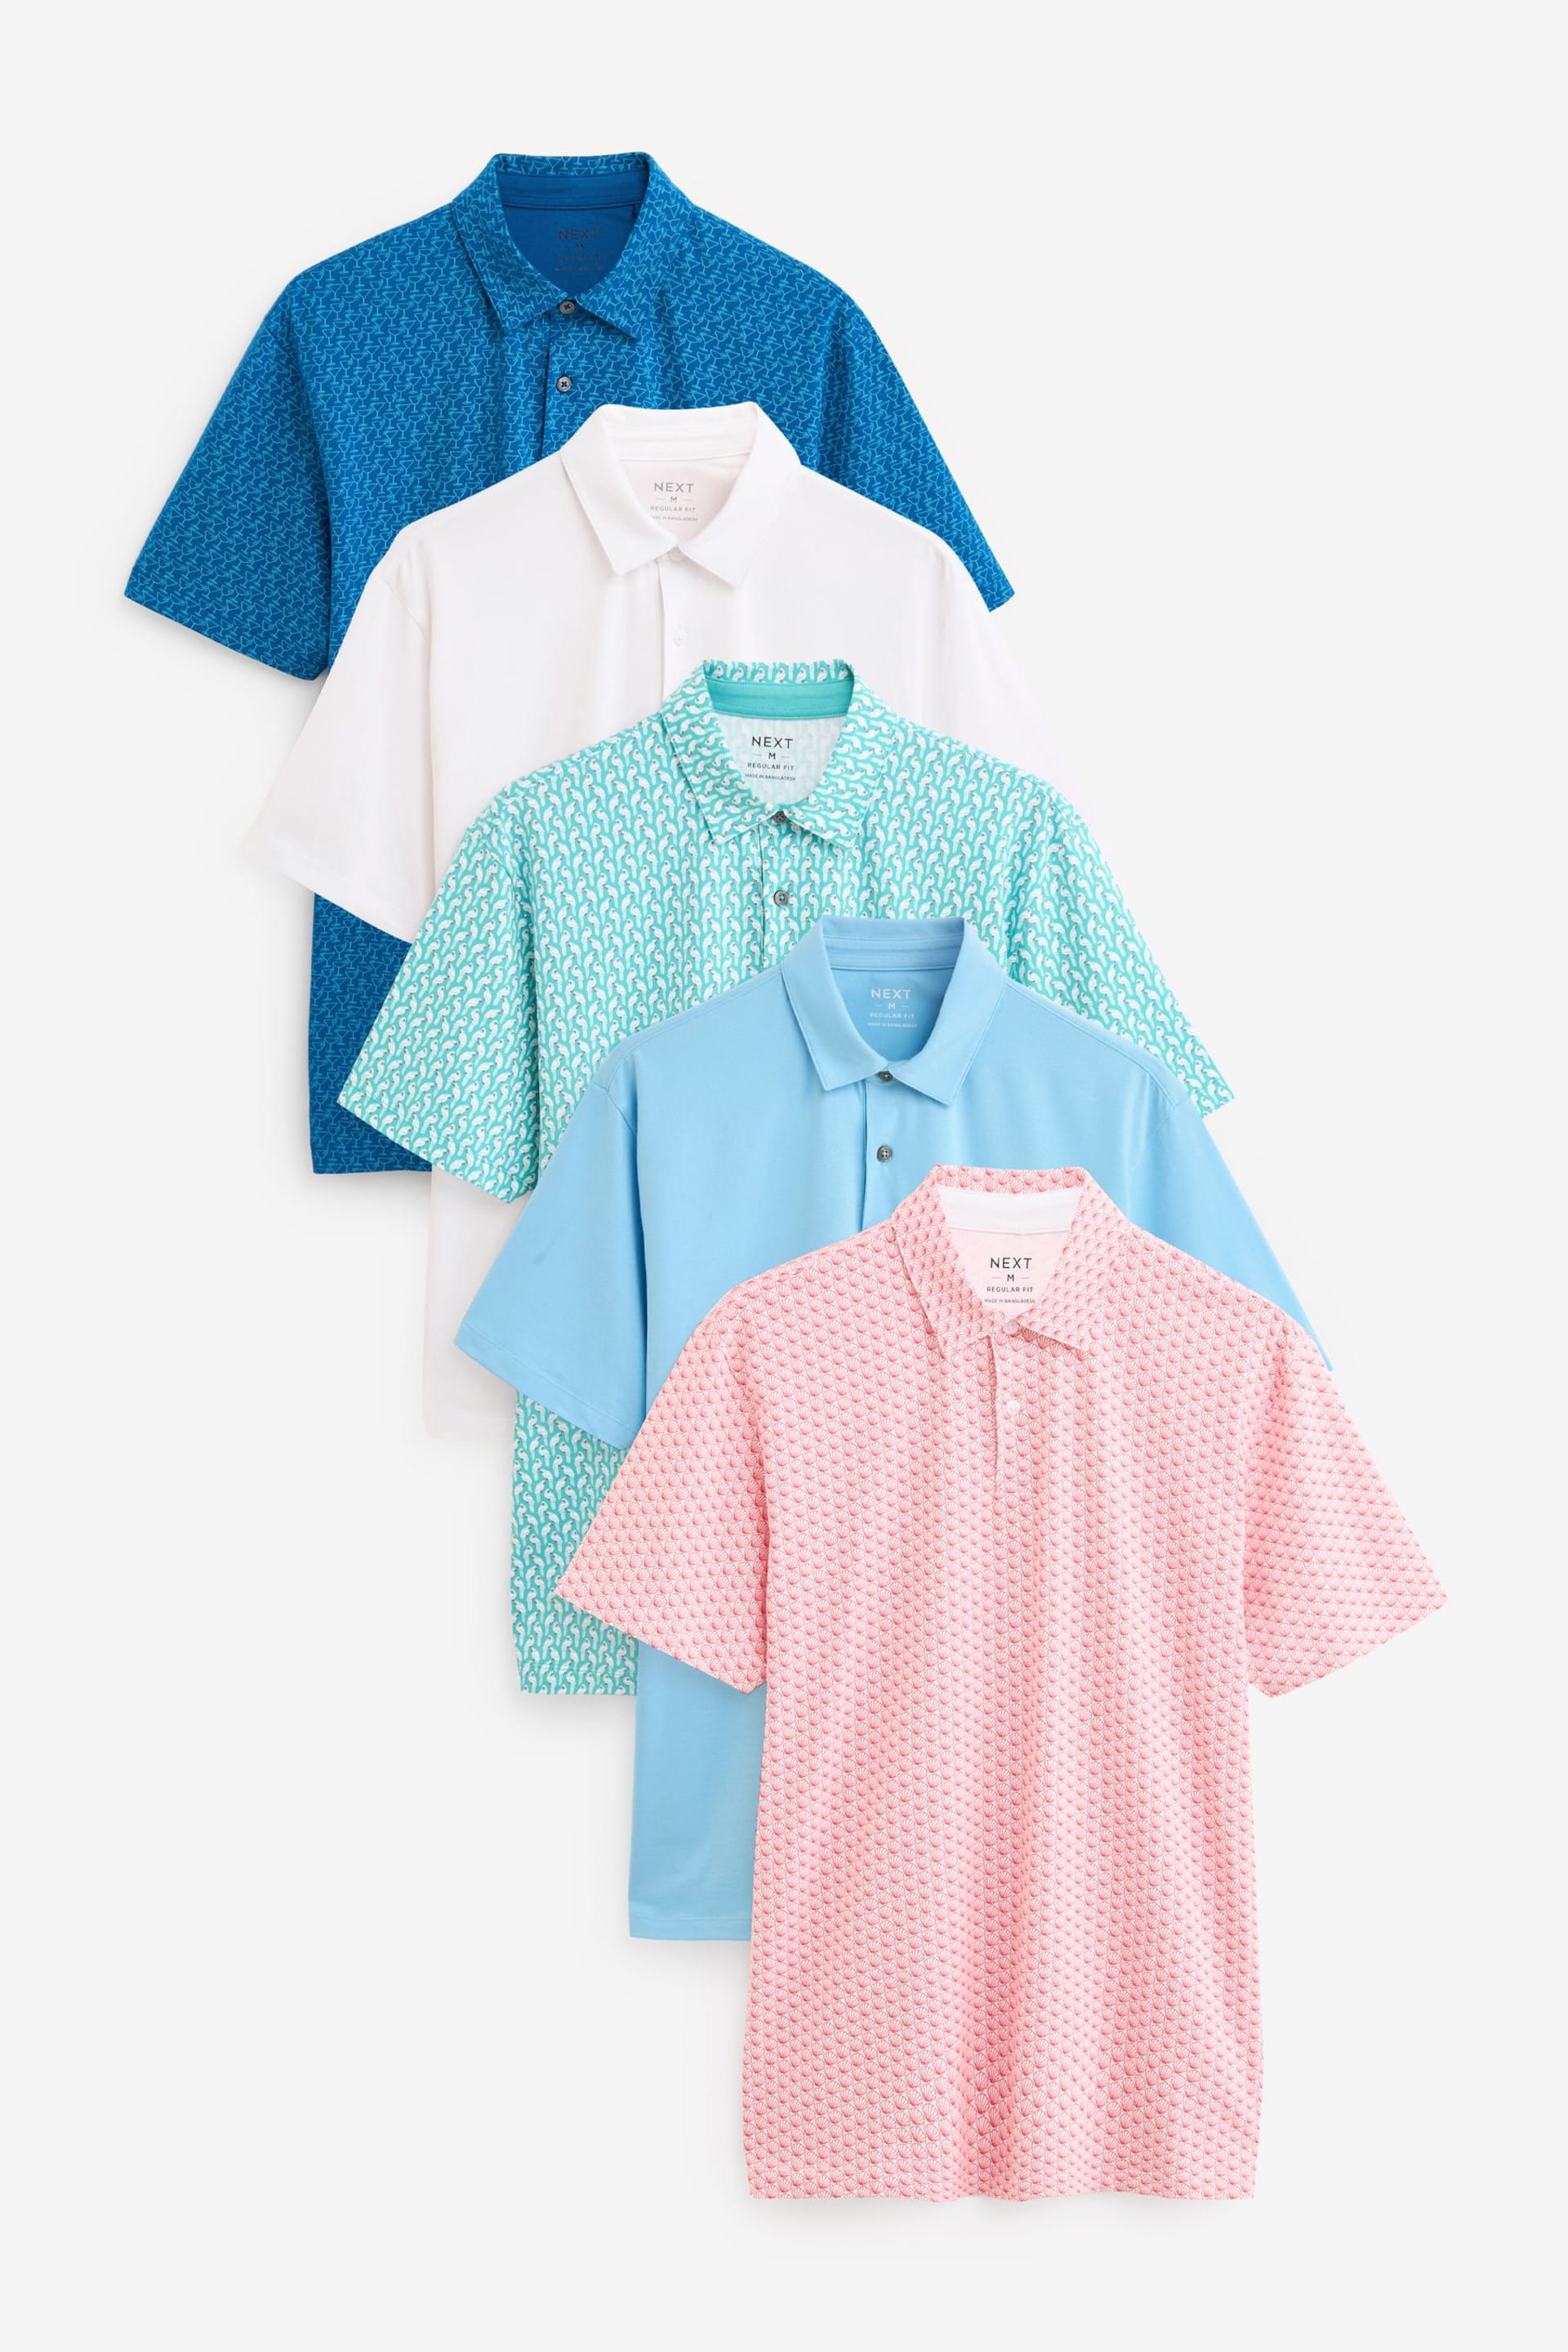 Blues/Green/White/Pink Print Regular Fit Short Sleeve Jersey Polo Shirts 5 Pack - Image 1 of 17